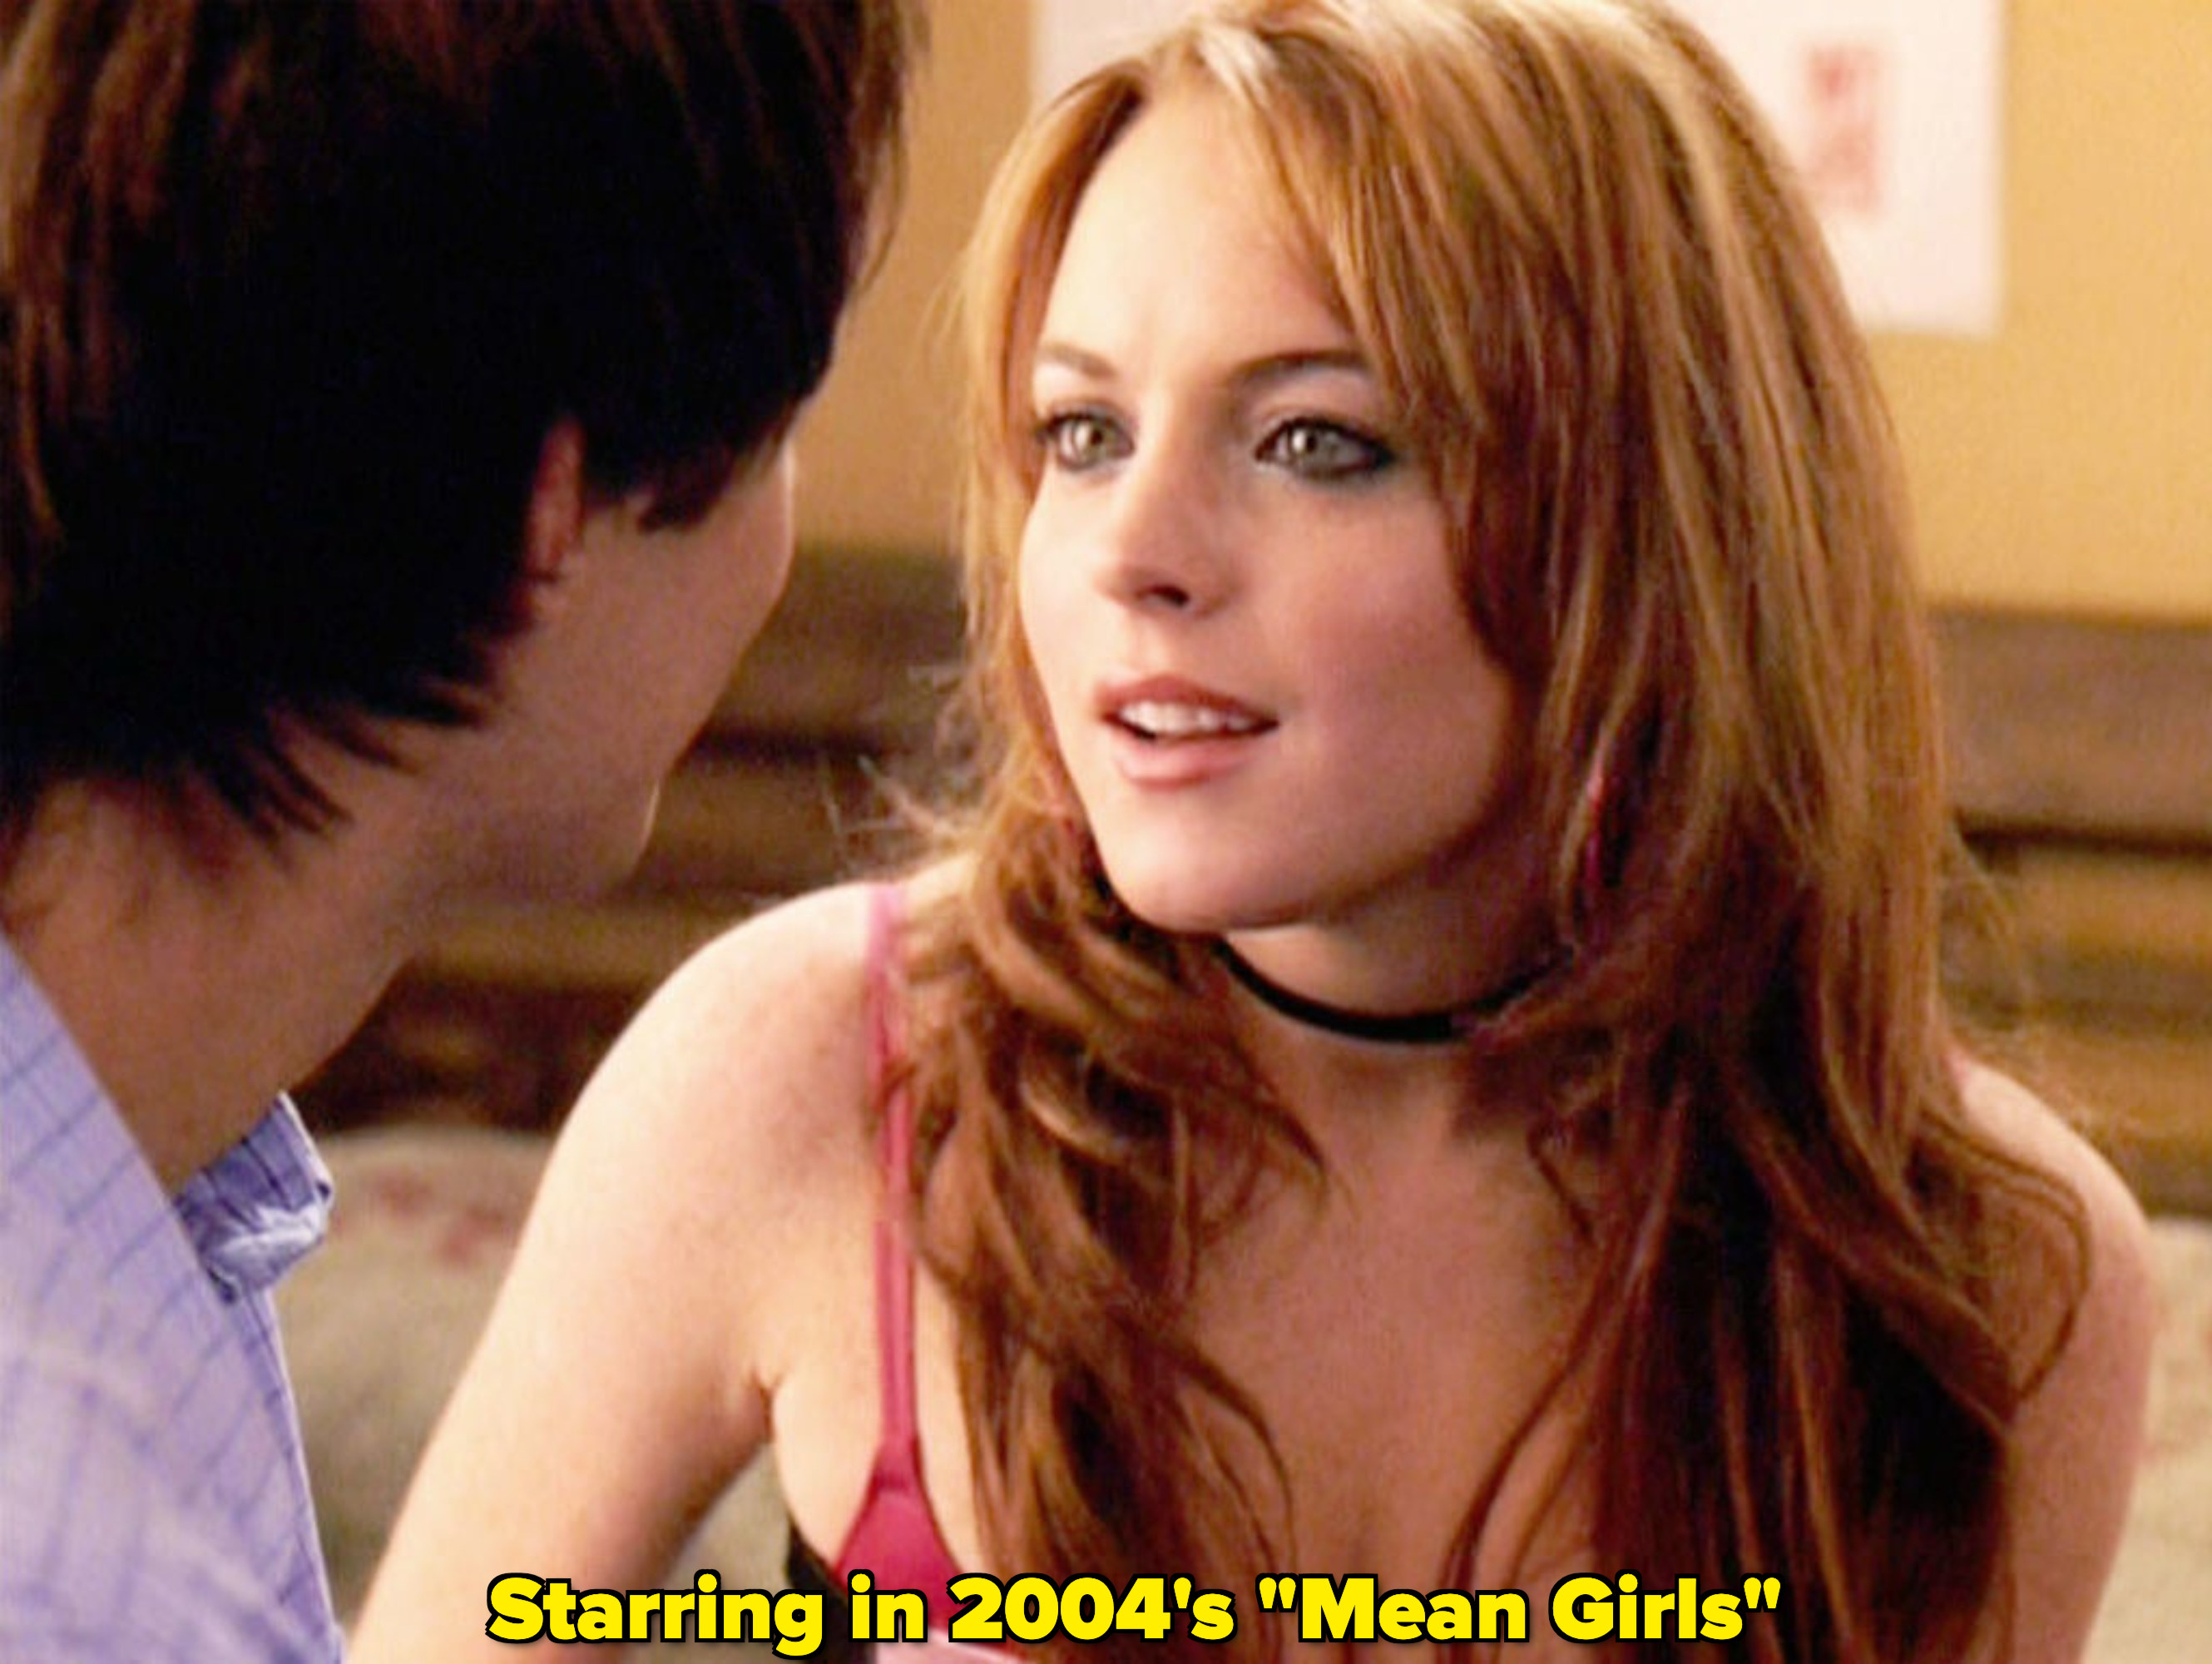 Lindsay Lohan looking at a guy and smiling in &quot;Mean Girls&quot;